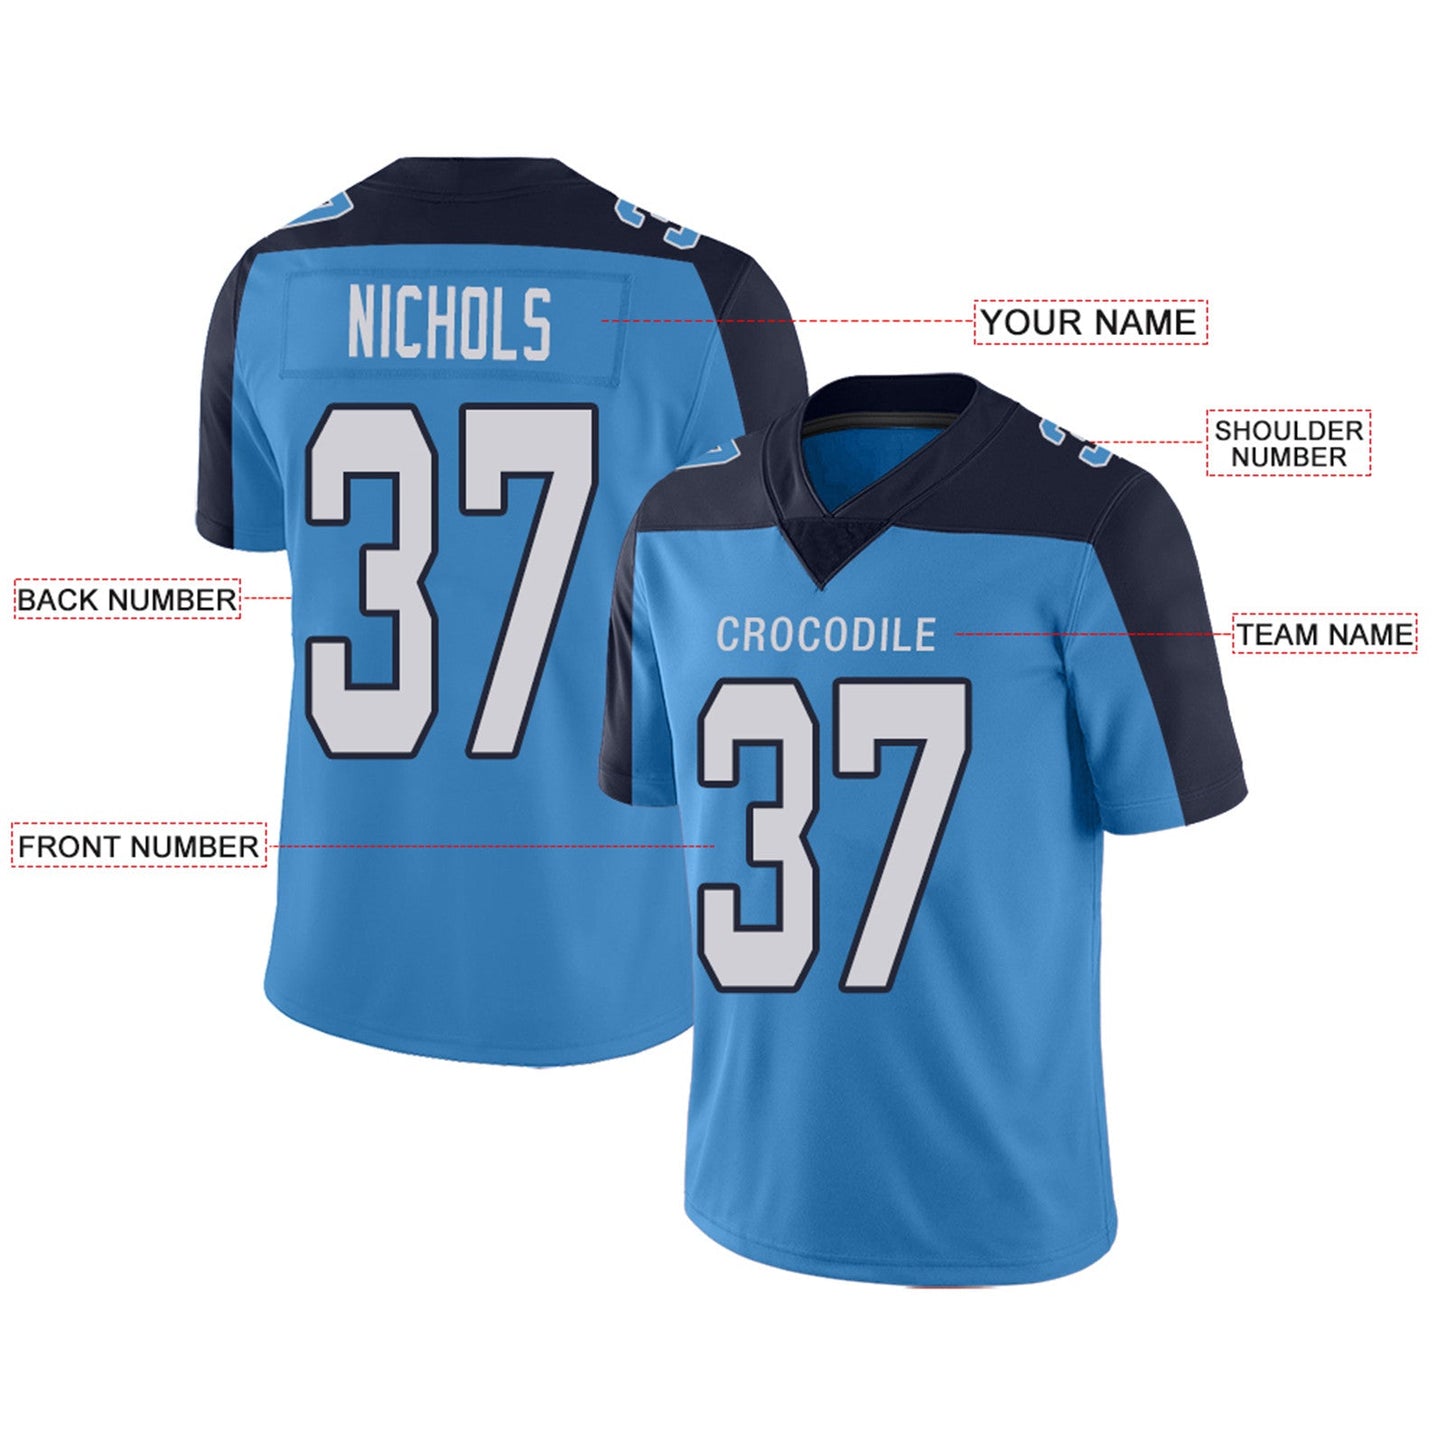 Custom T.Titans Football Jerseys Team Player or Personalized Design Your Own Name for Men's Women's Youth Jerseys Navy